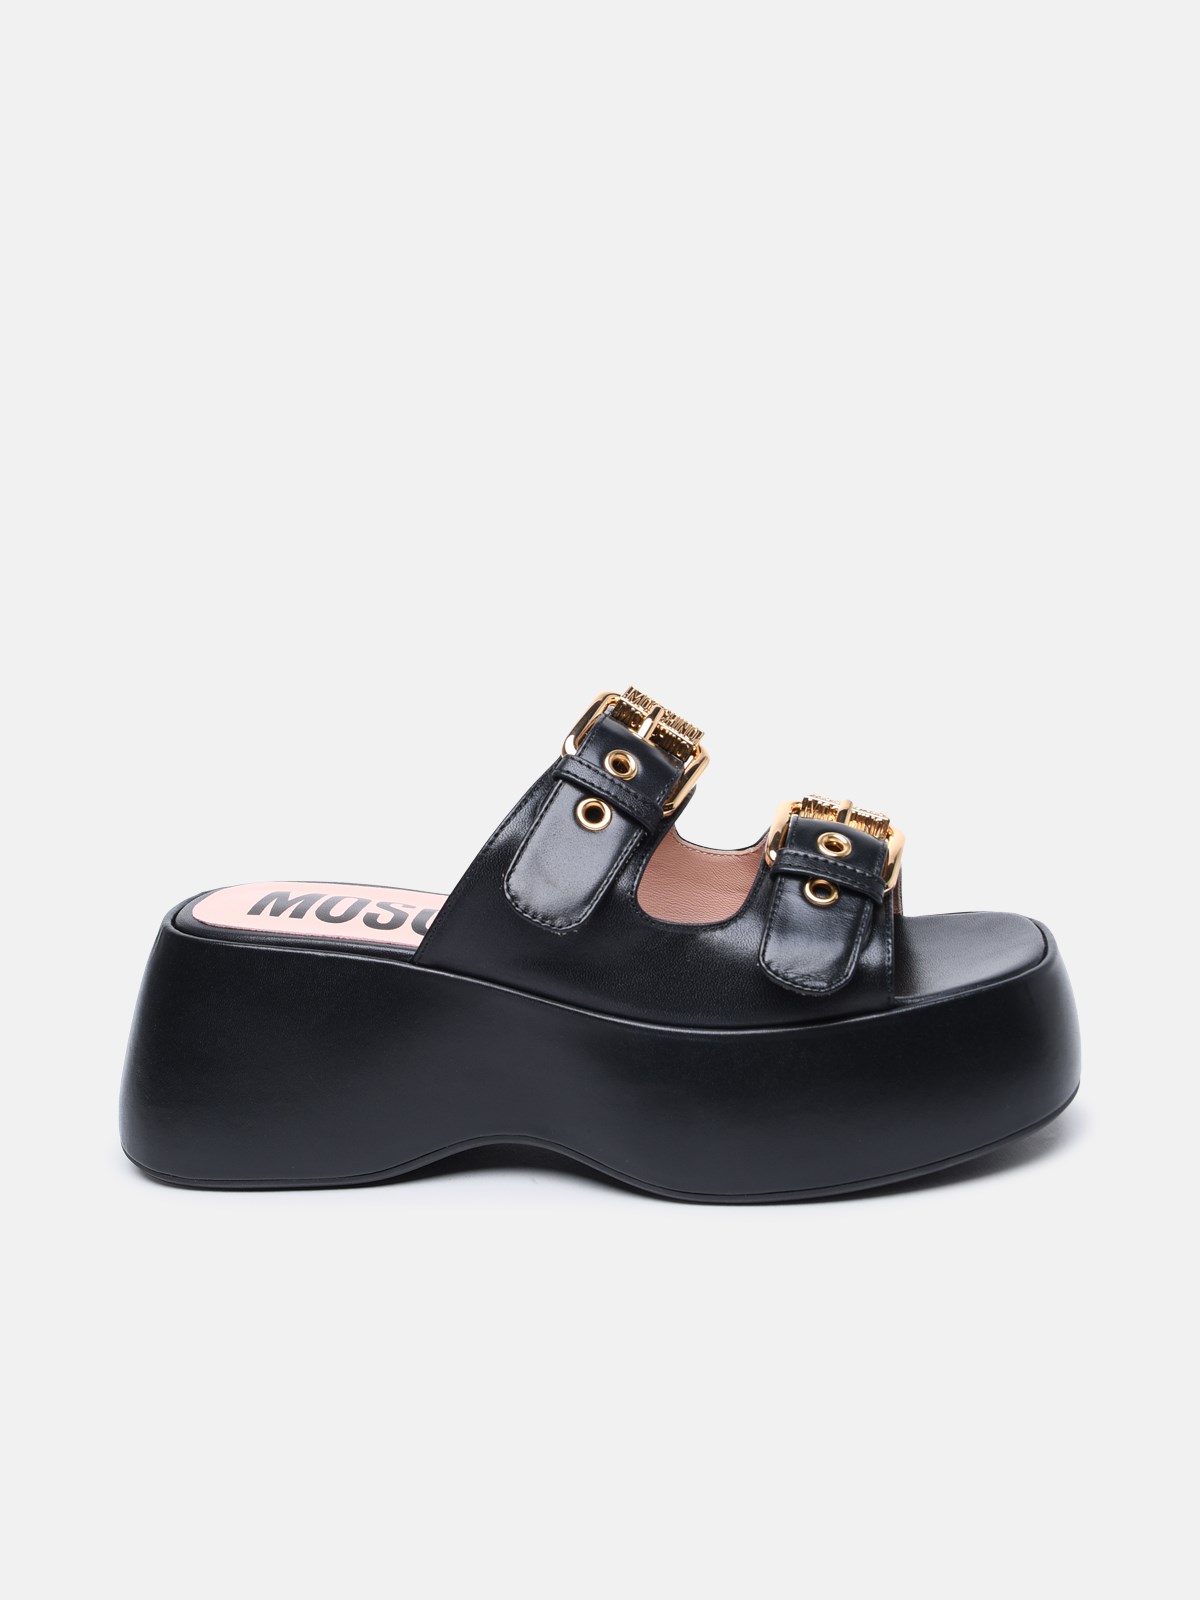 Moschino Black Leather Slippers